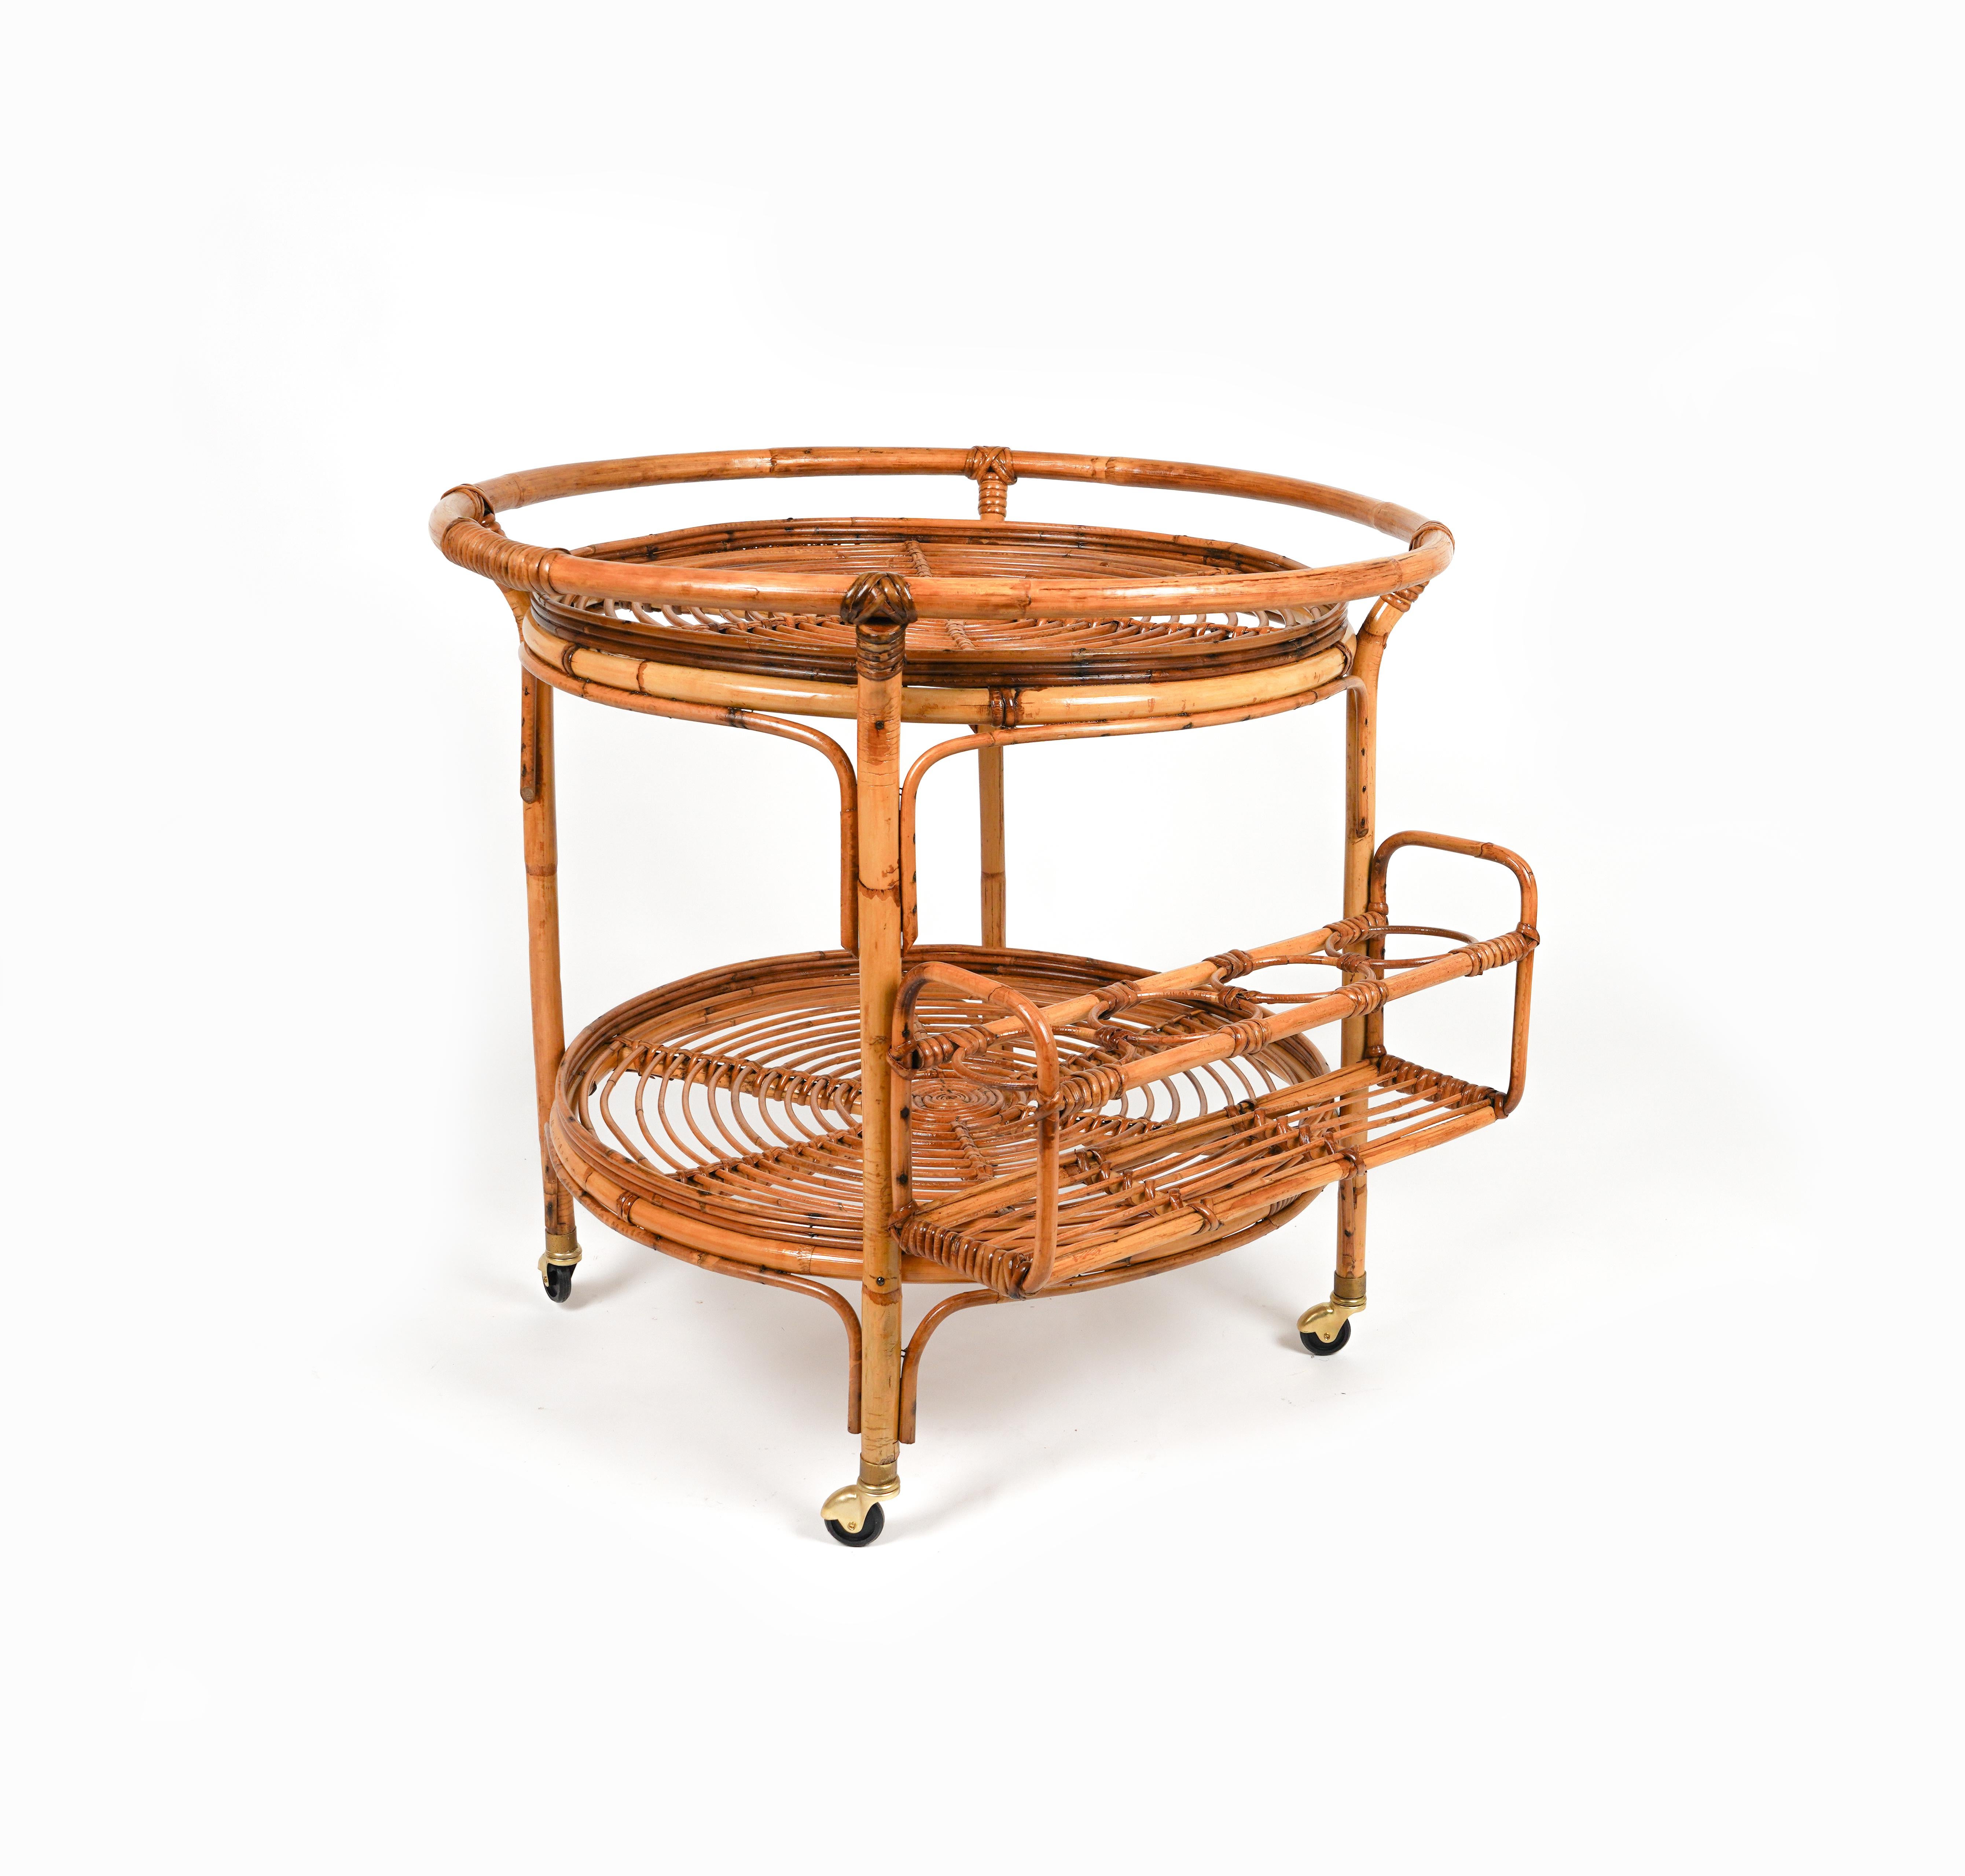 Midcentury Rattan and Bamboo Round Serving Bar Cart Trolley, Italy 1960s For Sale 4